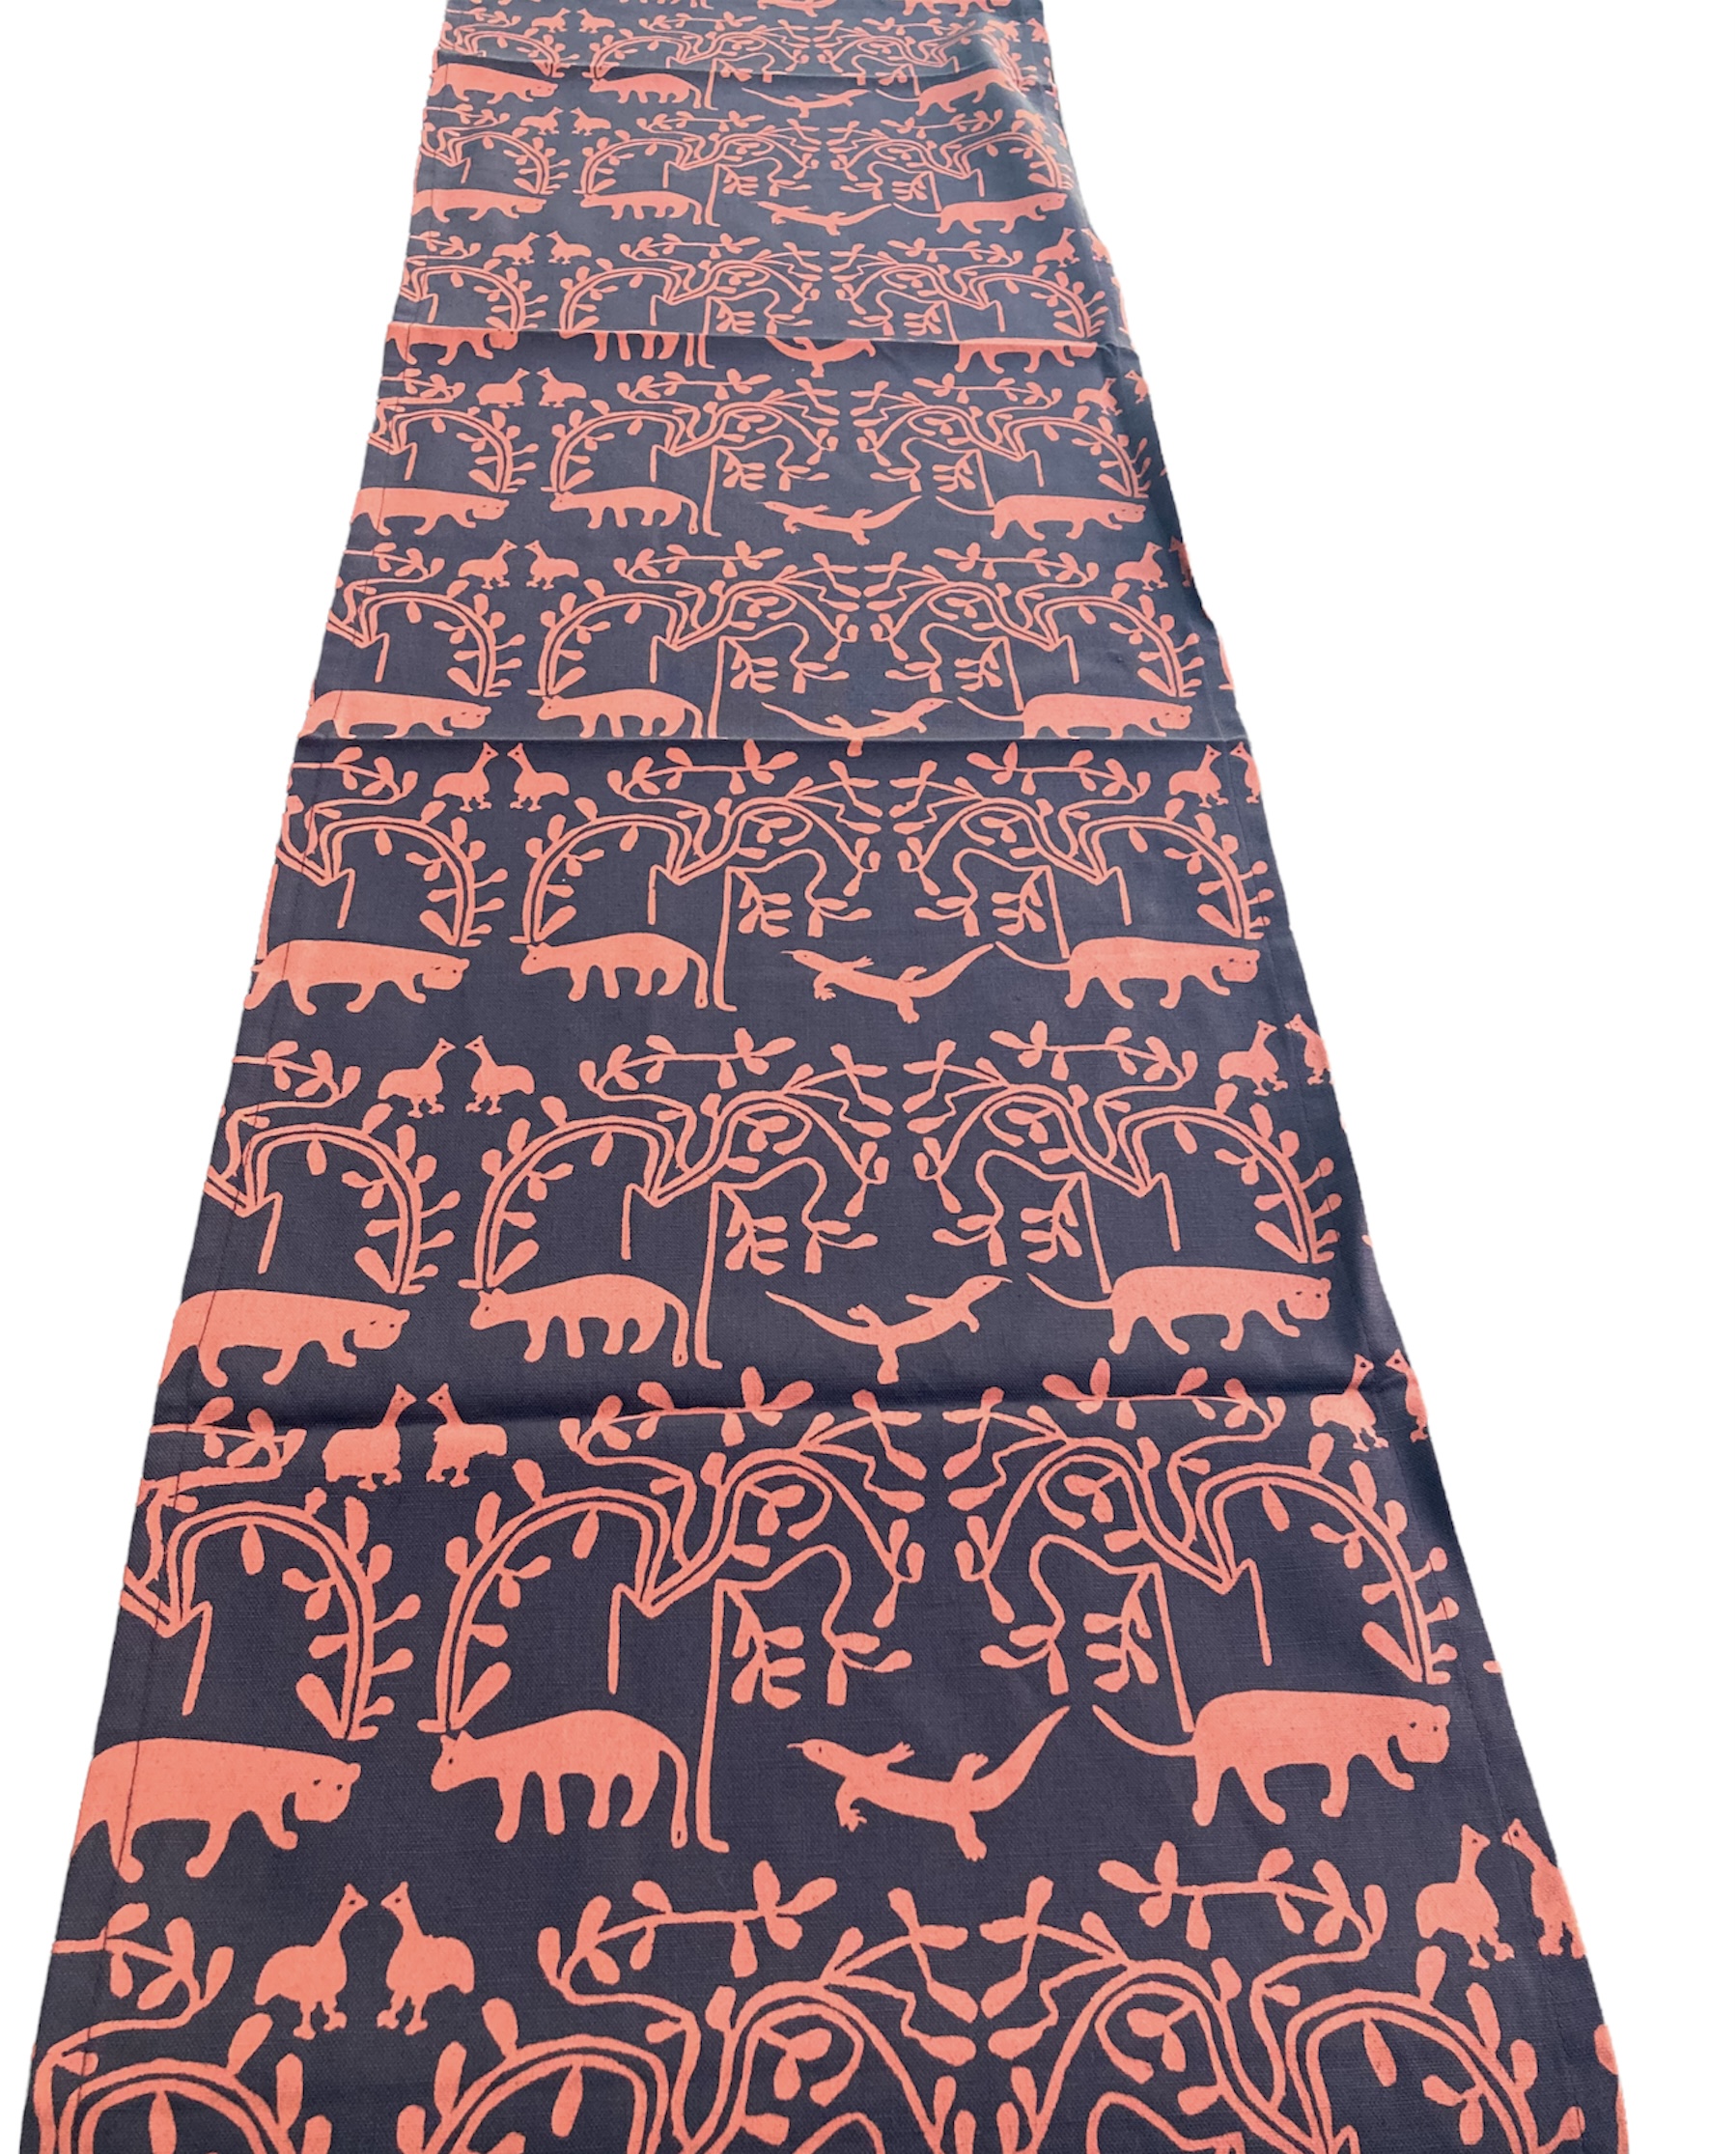 100% cotton Table Runner 58" x 16" from Namibia - Design 08s